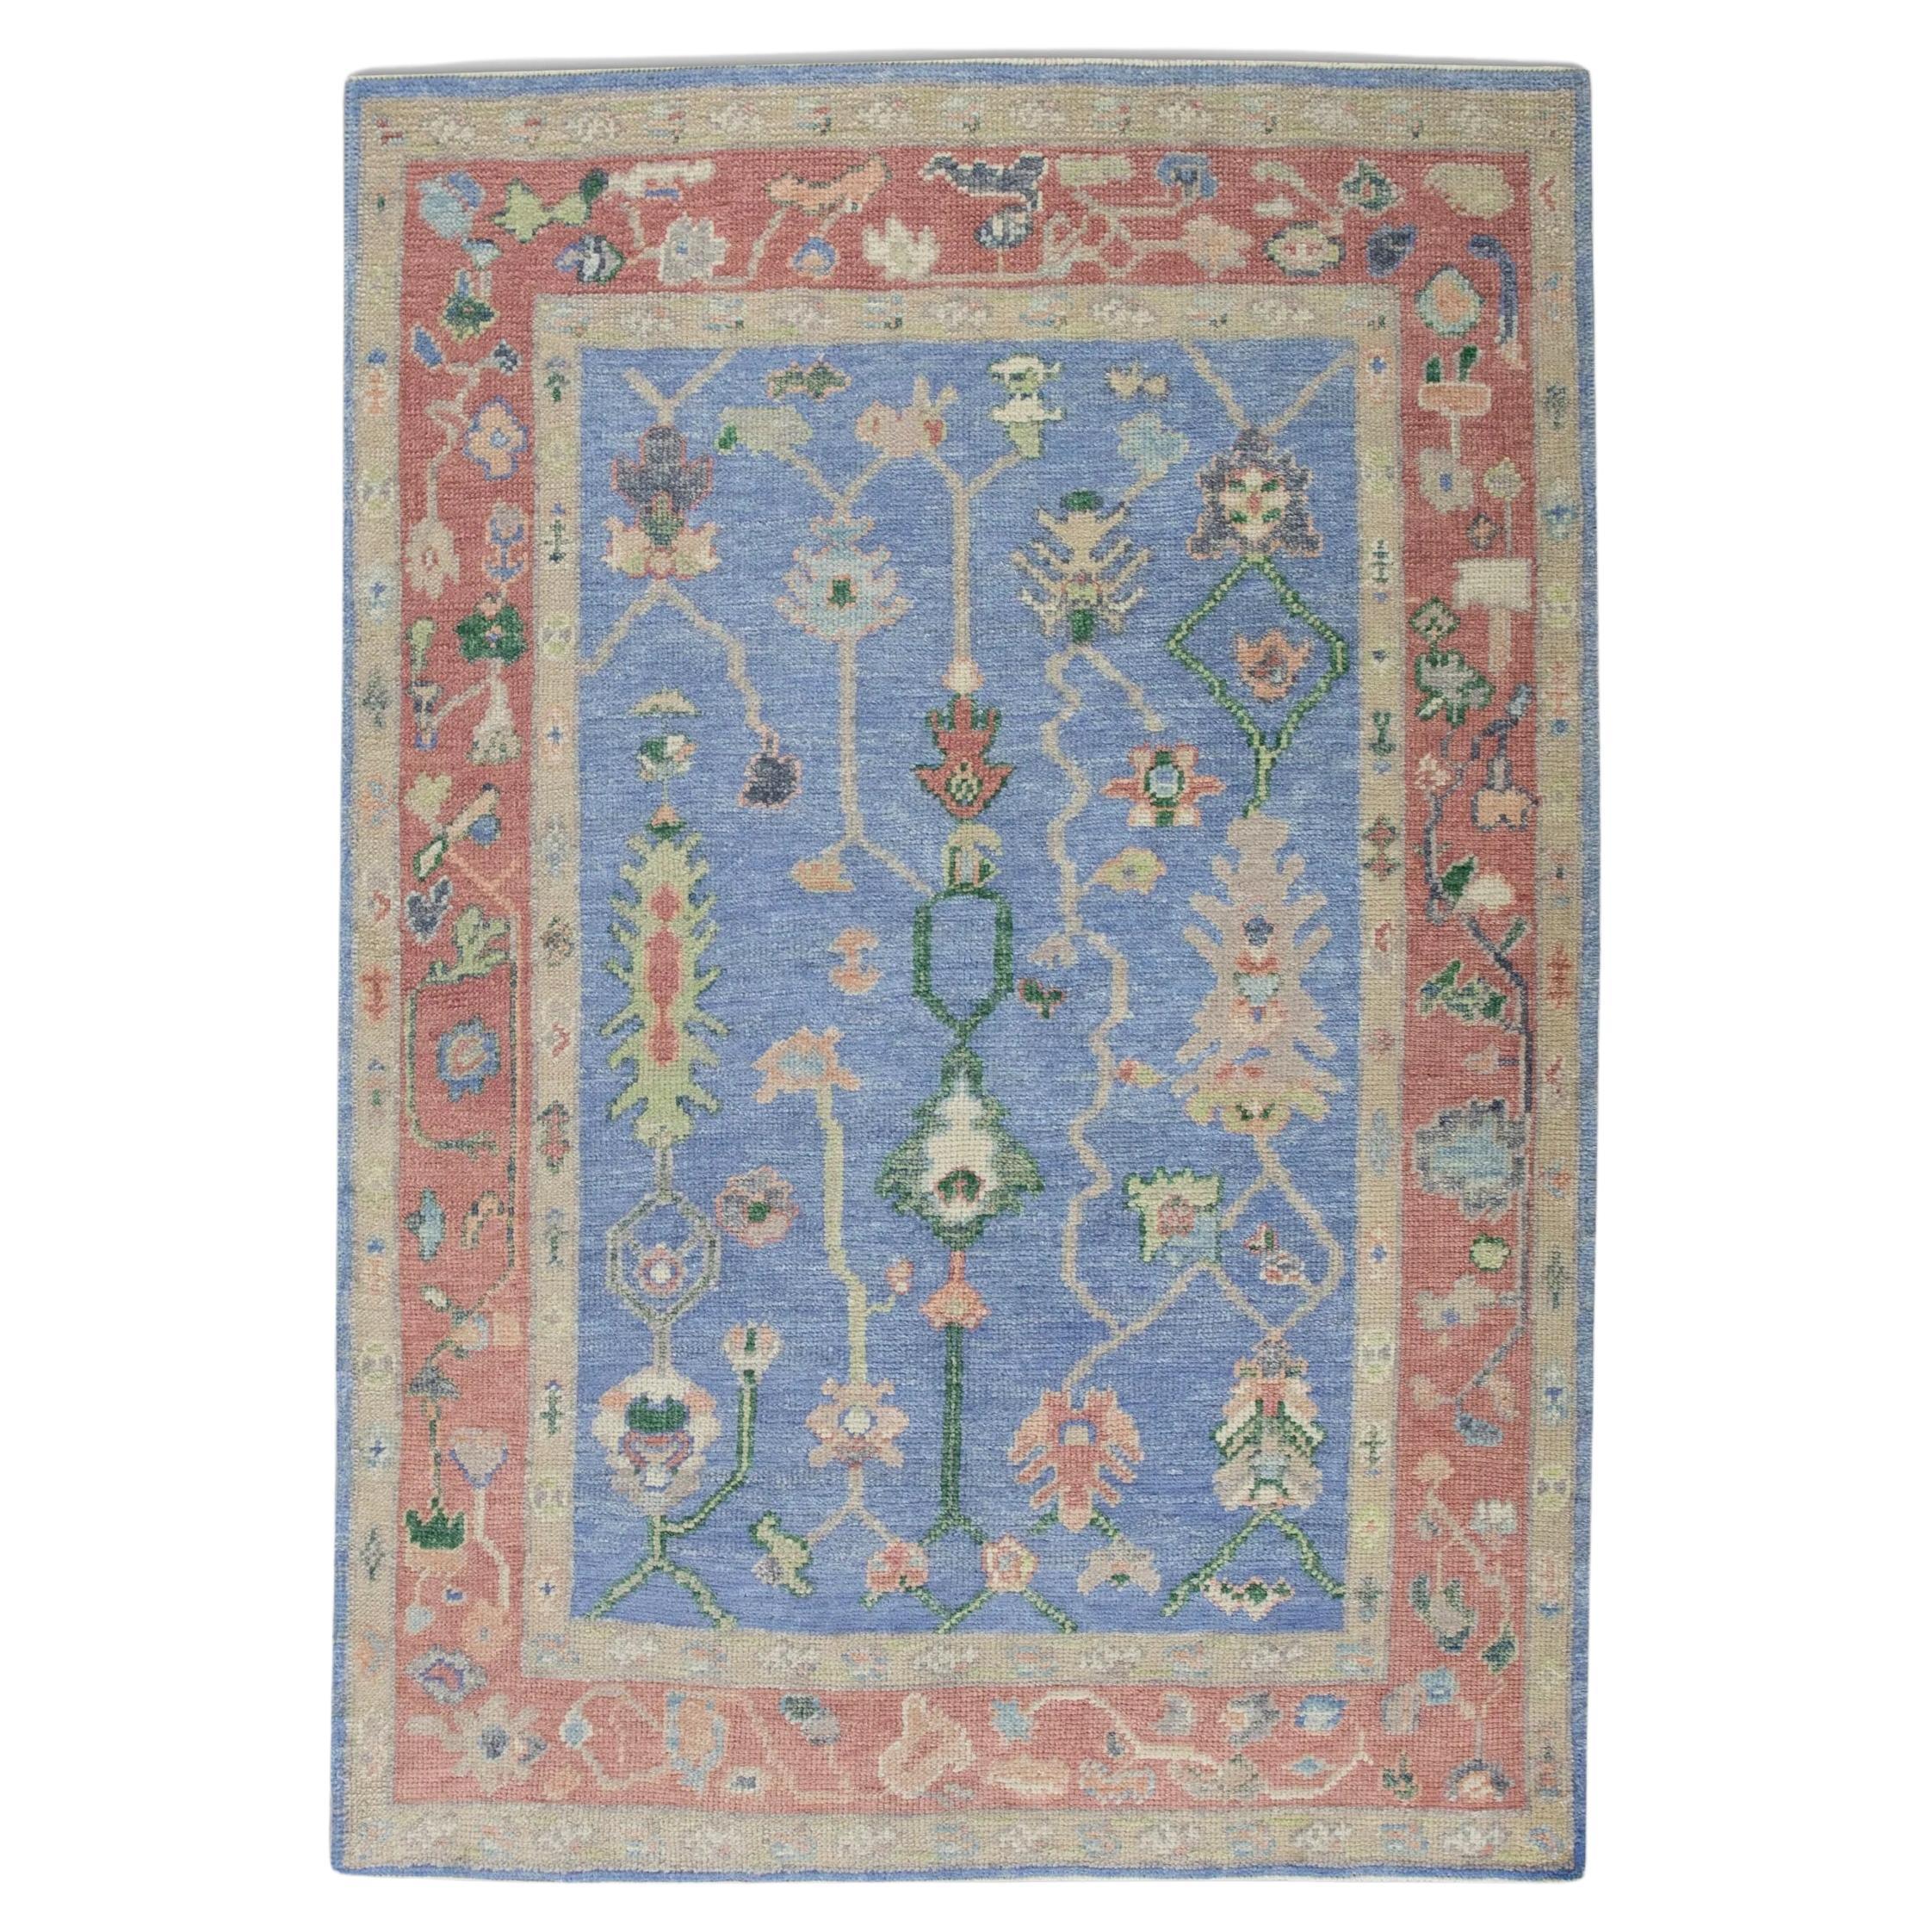 Blue & Red Floral Pattern Handwoven Wool Turkish Oushak Rug 4'2" x 5'10"